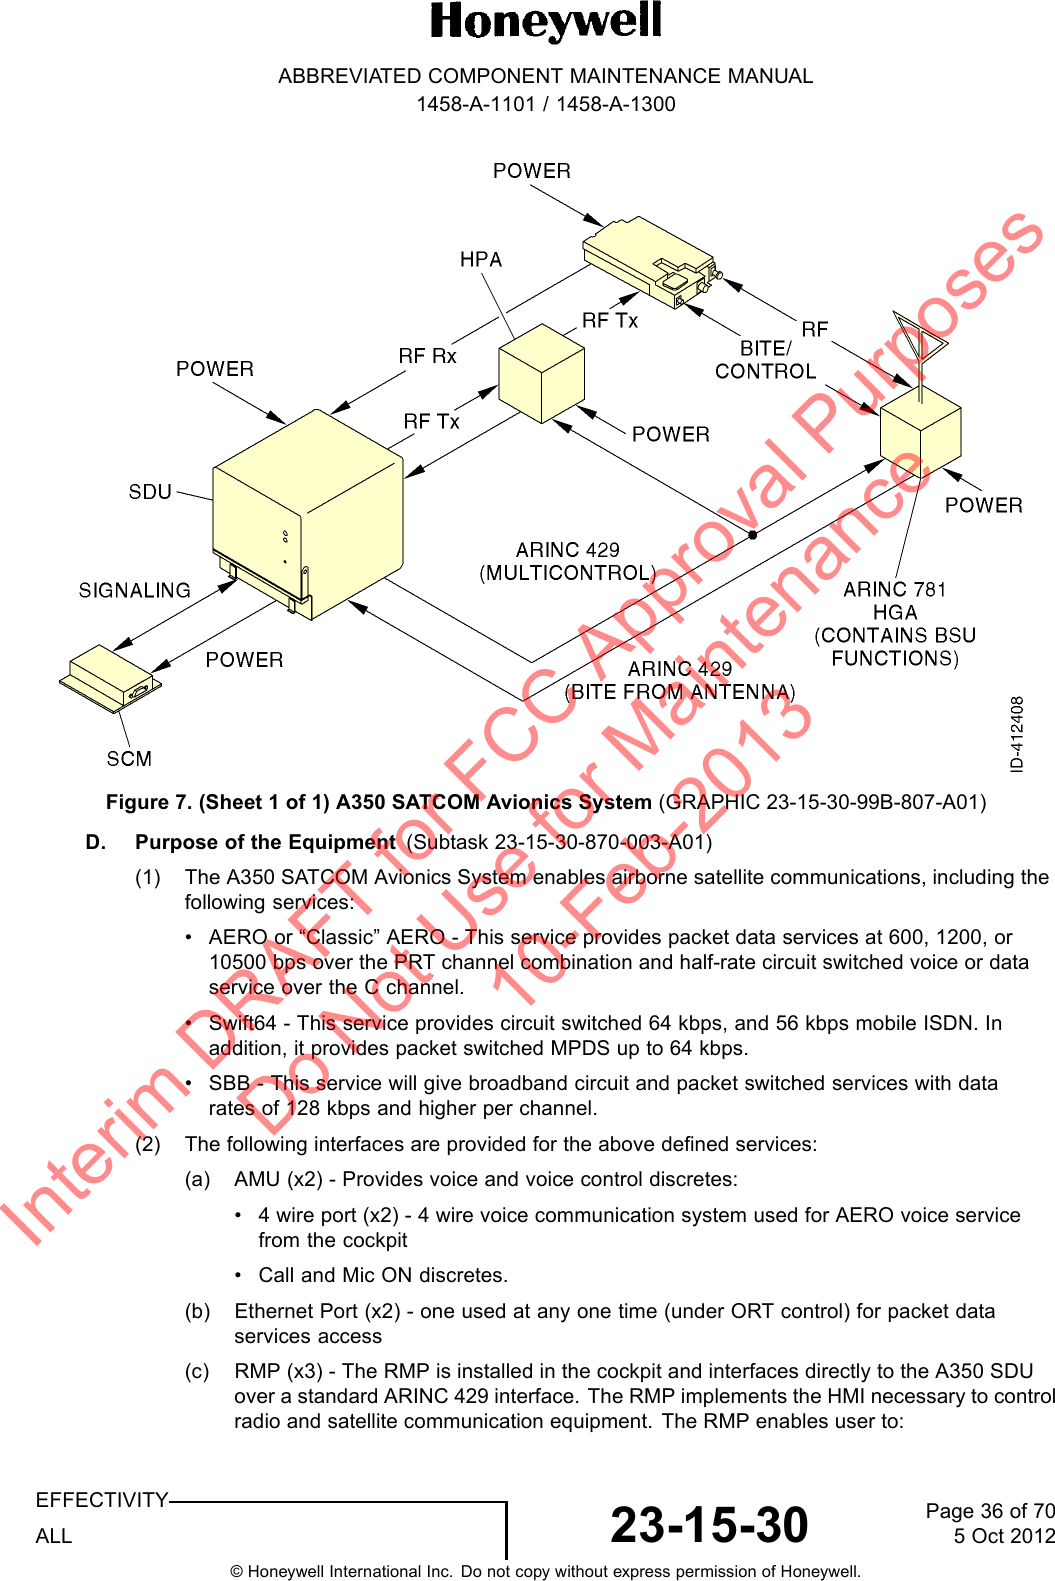 ABBREVIATED COMPONENT MAINTENANCE MANUAL1458-A-1101 / 1458-A-1300Figure 7. (Sheet 1 of 1) A350 SATCOM Avionics System (GRAPHIC 23-15-30-99B-807-A01)D. Purpose of the Equipment (Subtask 23-15-30-870-003-A01)(1) The A350 SATCOM Avionics System enables airborne satellite communications, including thefollowing services:• AERO or “Classic” AERO - This service provides packet data services at 600, 1200, or10500 bps over the PRT channel combination and half-rate circuit switched voice or dataservice over the C channel.• Swift64 - This service provides circuit switched 64 kbps, and 56 kbps mobile ISDN. Inaddition, it provides packet switched MPDS up to 64 kbps.• SBB - This service will give broadband circuit and packet switched services with datarates of 128 kbps and higher per channel.(2) The following interfaces are provided for the above defined services:(a) AMU (x2) - Provides voice and voice control discretes:• 4 wire port (x2) - 4 wire voice communication system used for AERO voice servicefrom the cockpit• Call and Mic ON discretes.(b) Ethernet Port (x2) - one used at any one time (under ORT control) for packet dataservices access(c) RMP (x3) - The RMP is installed in the cockpit and interfaces directly to the A350 SDUover a standard ARINC 429 interface. The RMP implements the HMI necessary to controlradio and satellite communication equipment. The RMP enables user to:EFFECTIVITYALL 23-15-30 Page 36 of 705 Oct 2012© Honeywell International Inc. Do not copy without express permission of Honeywell.Interim DRAFT for FCC Approval Purposes Do Not Use for Maintenance 10-Feb-2013